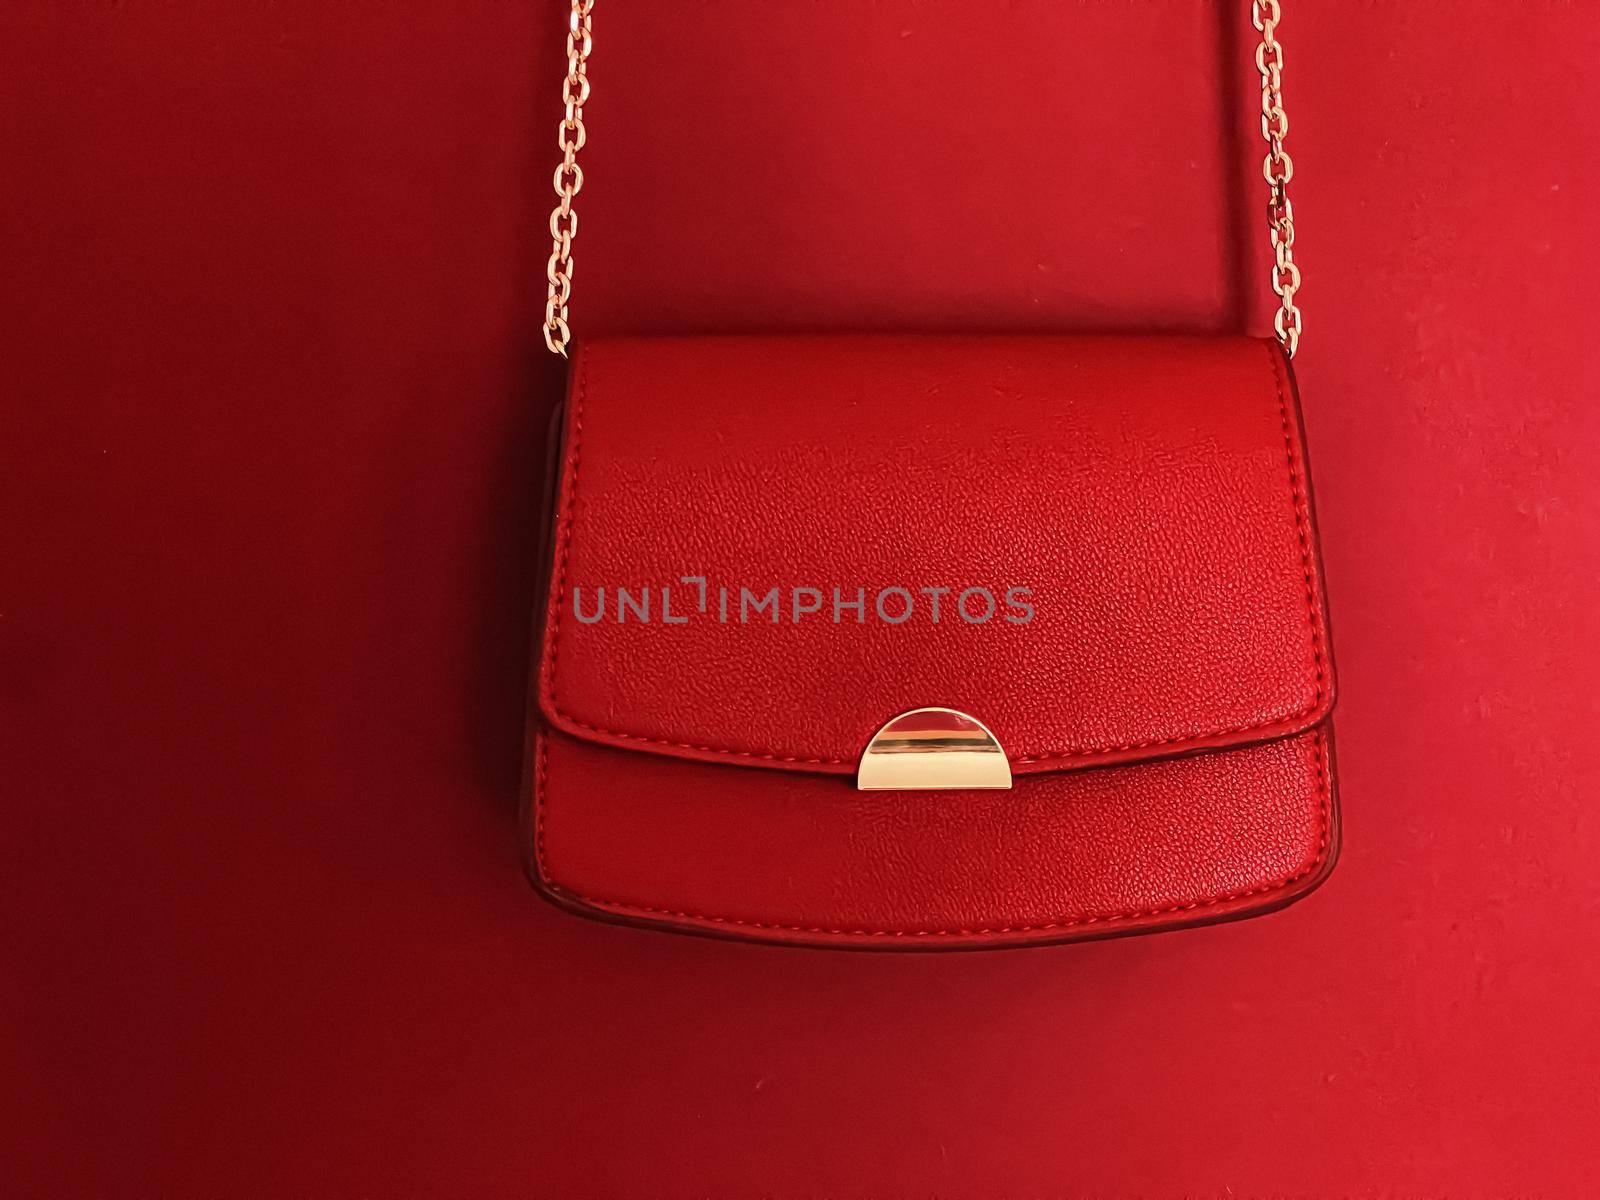 Red fashionable leather purse with gold details as designer bag and stylish accessory, female fashion and luxury style handbag collection concept